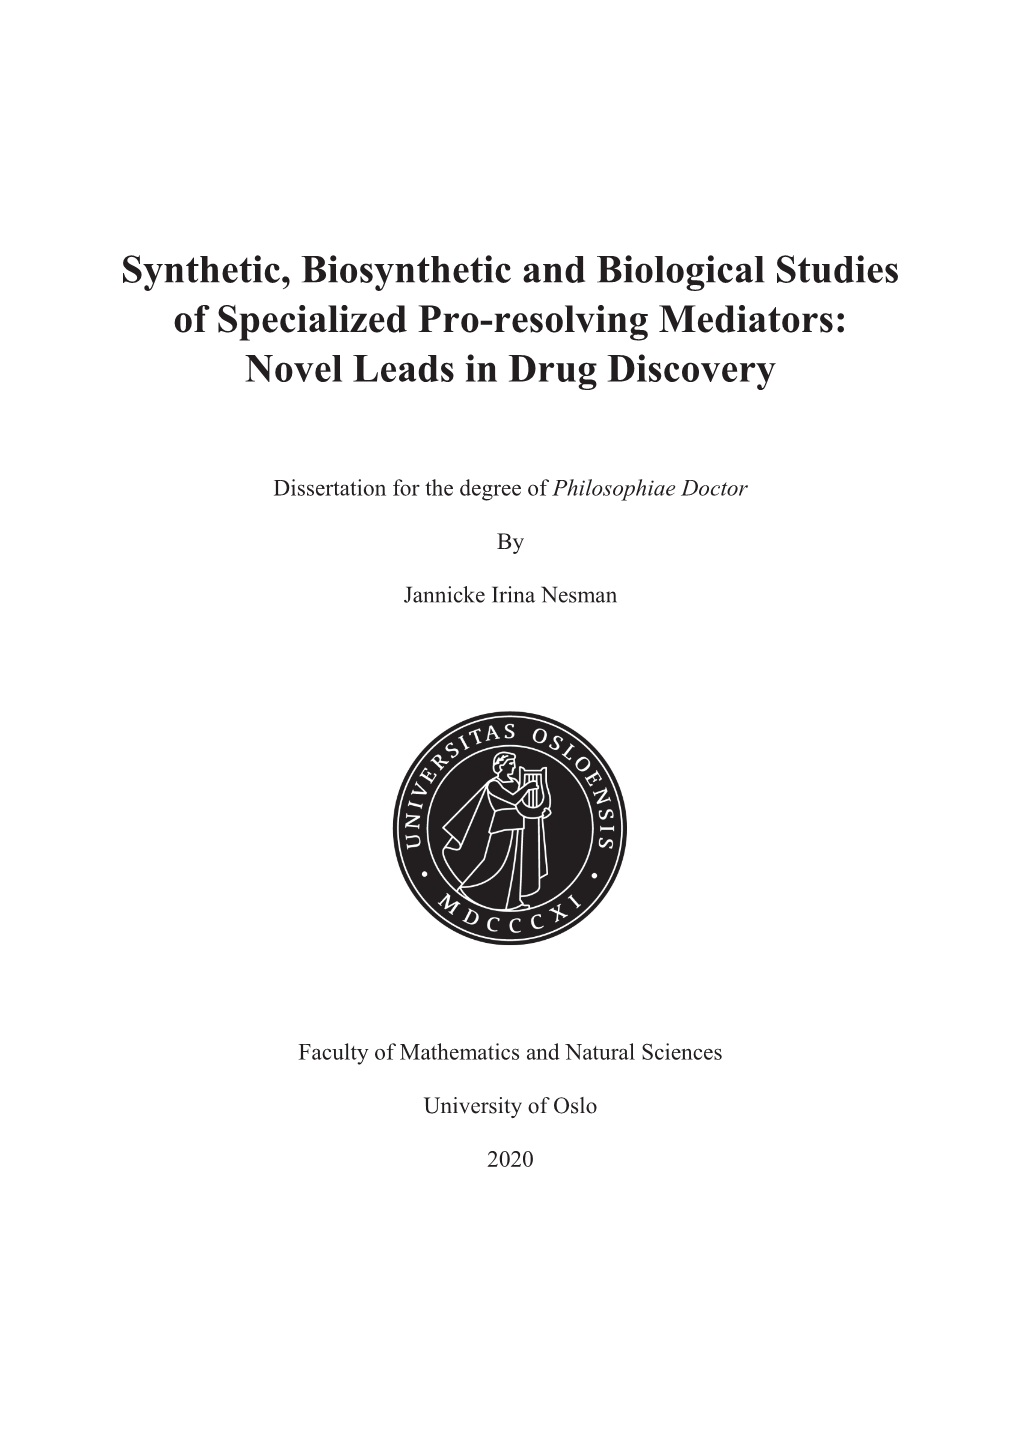 Synthetic, Biosynthetic and Biological Studies of Specialized Pro-Resolving Mediators: Novel Leads in Drug Discovery